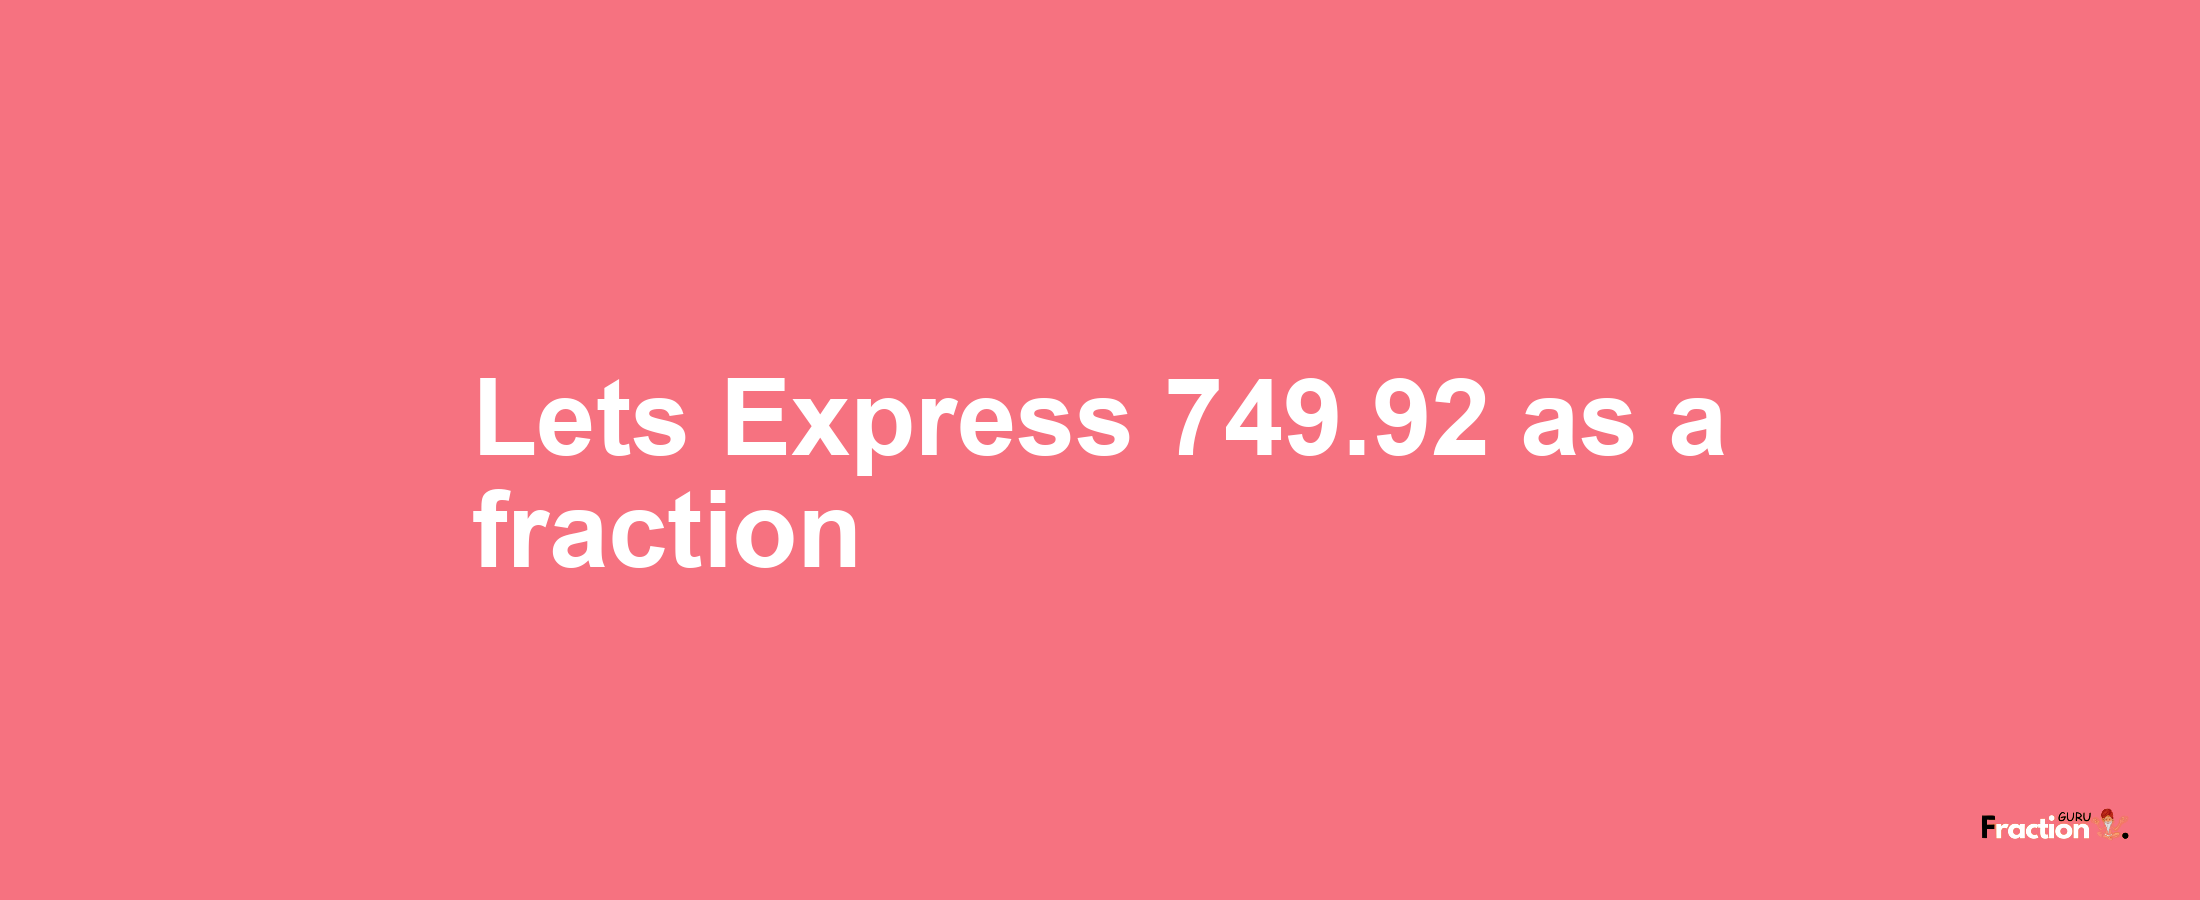 Lets Express 749.92 as afraction